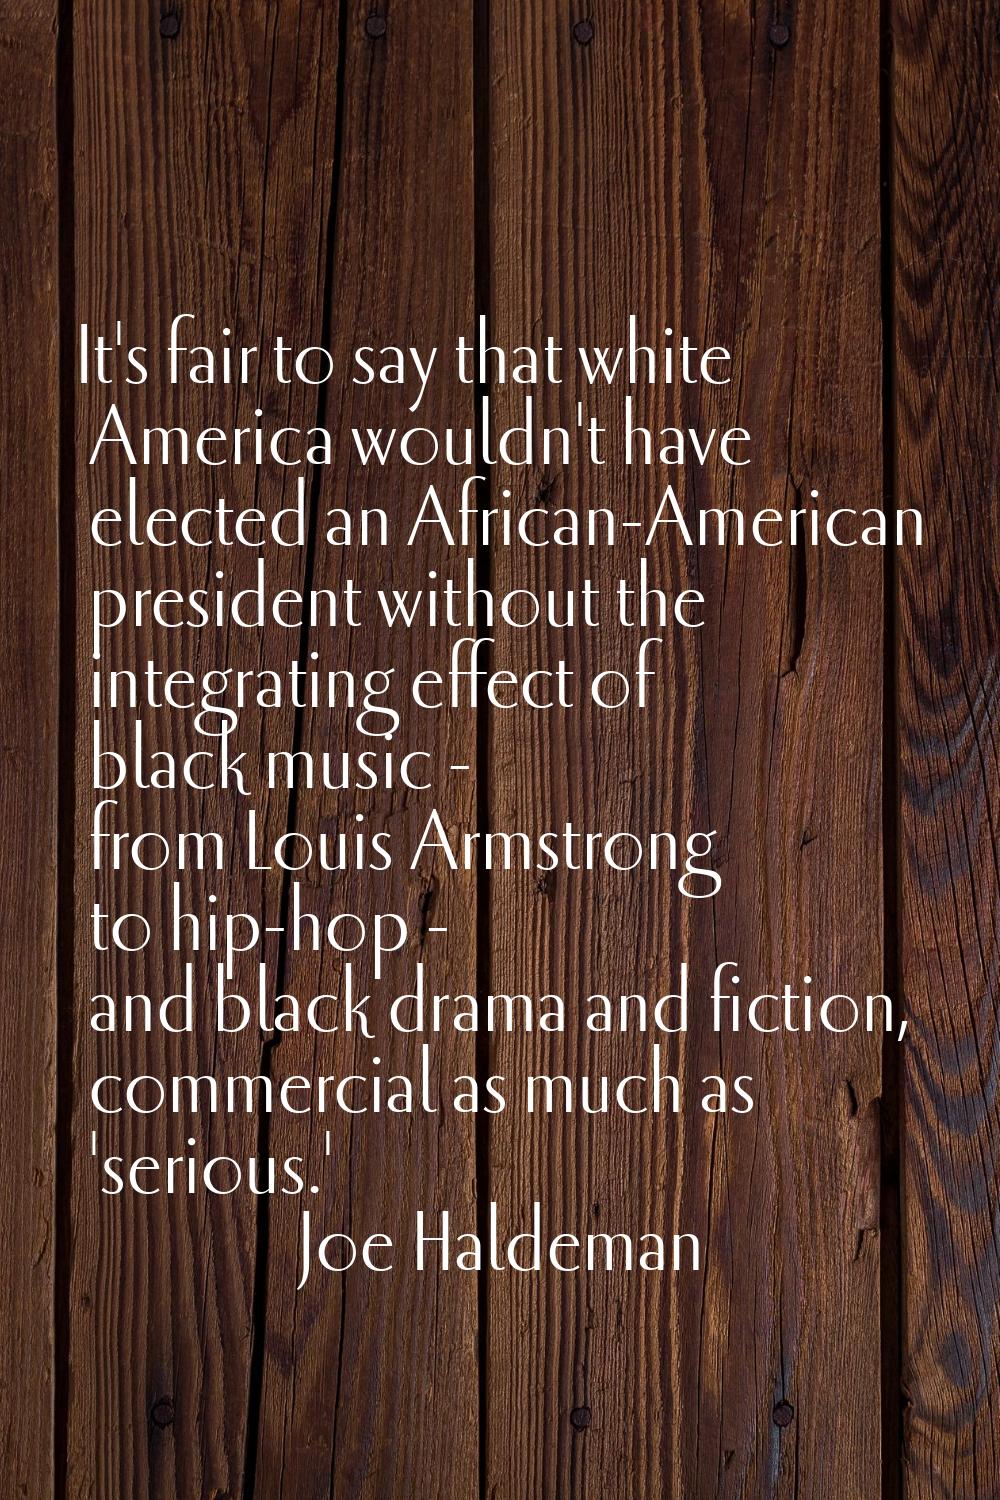 It's fair to say that white America wouldn't have elected an African-American president without the